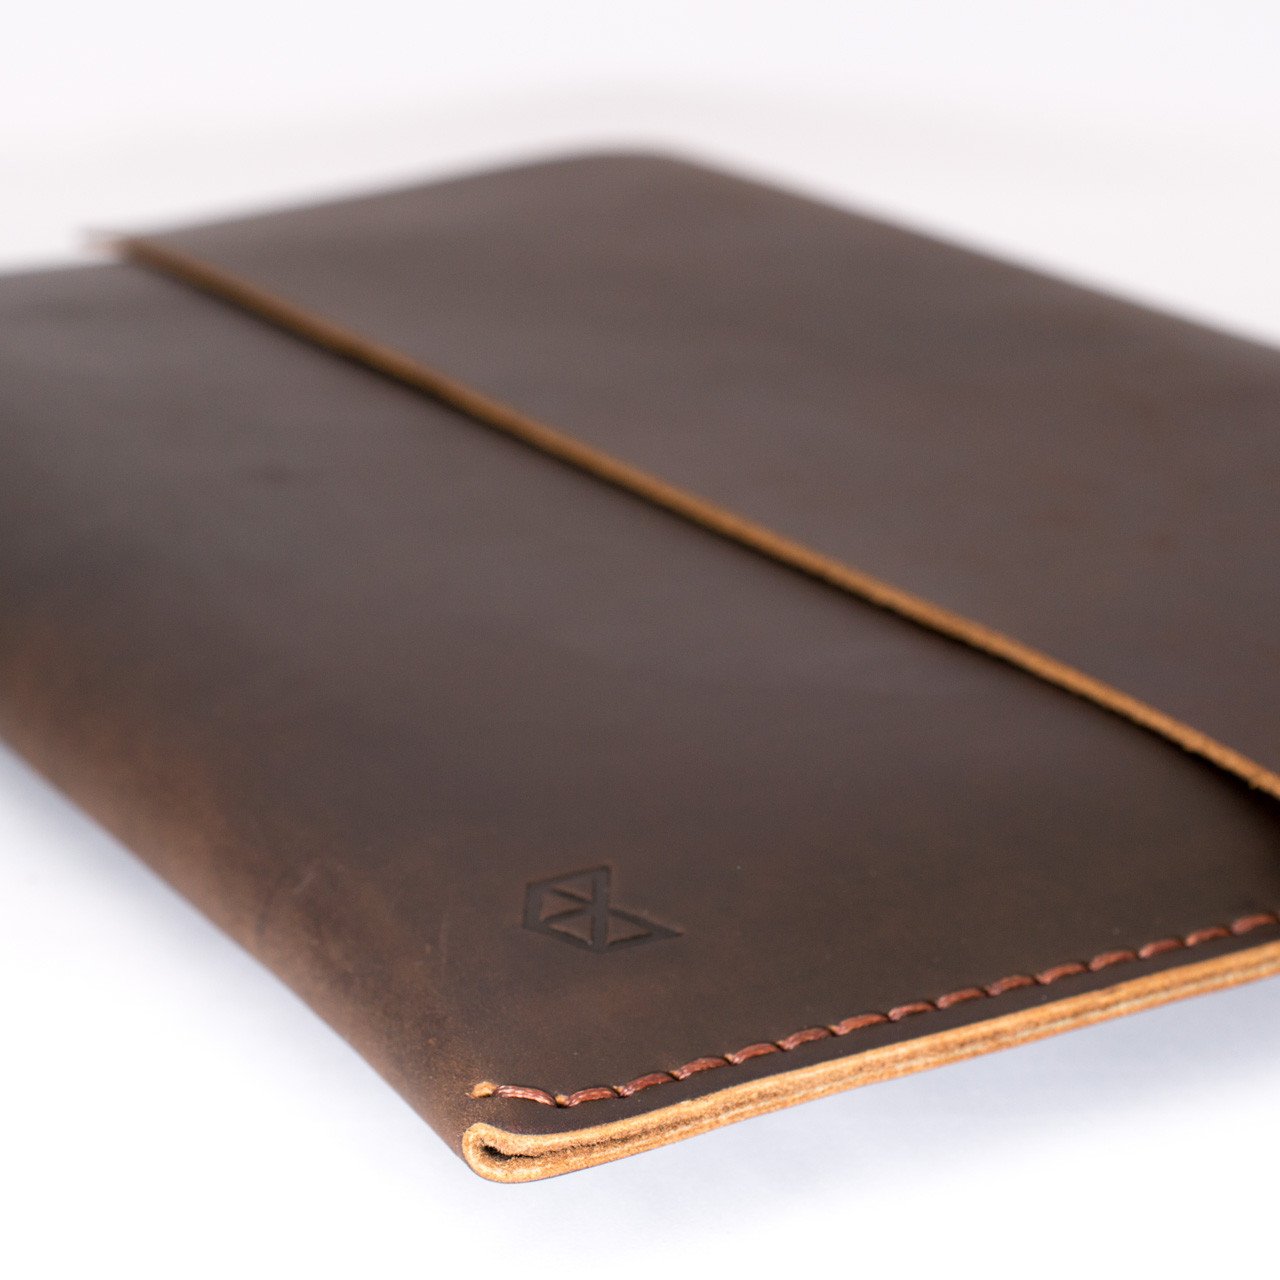 Hand Stitched. Brown Leather MacBook Case. MacBook Sleeve by Capra Leather